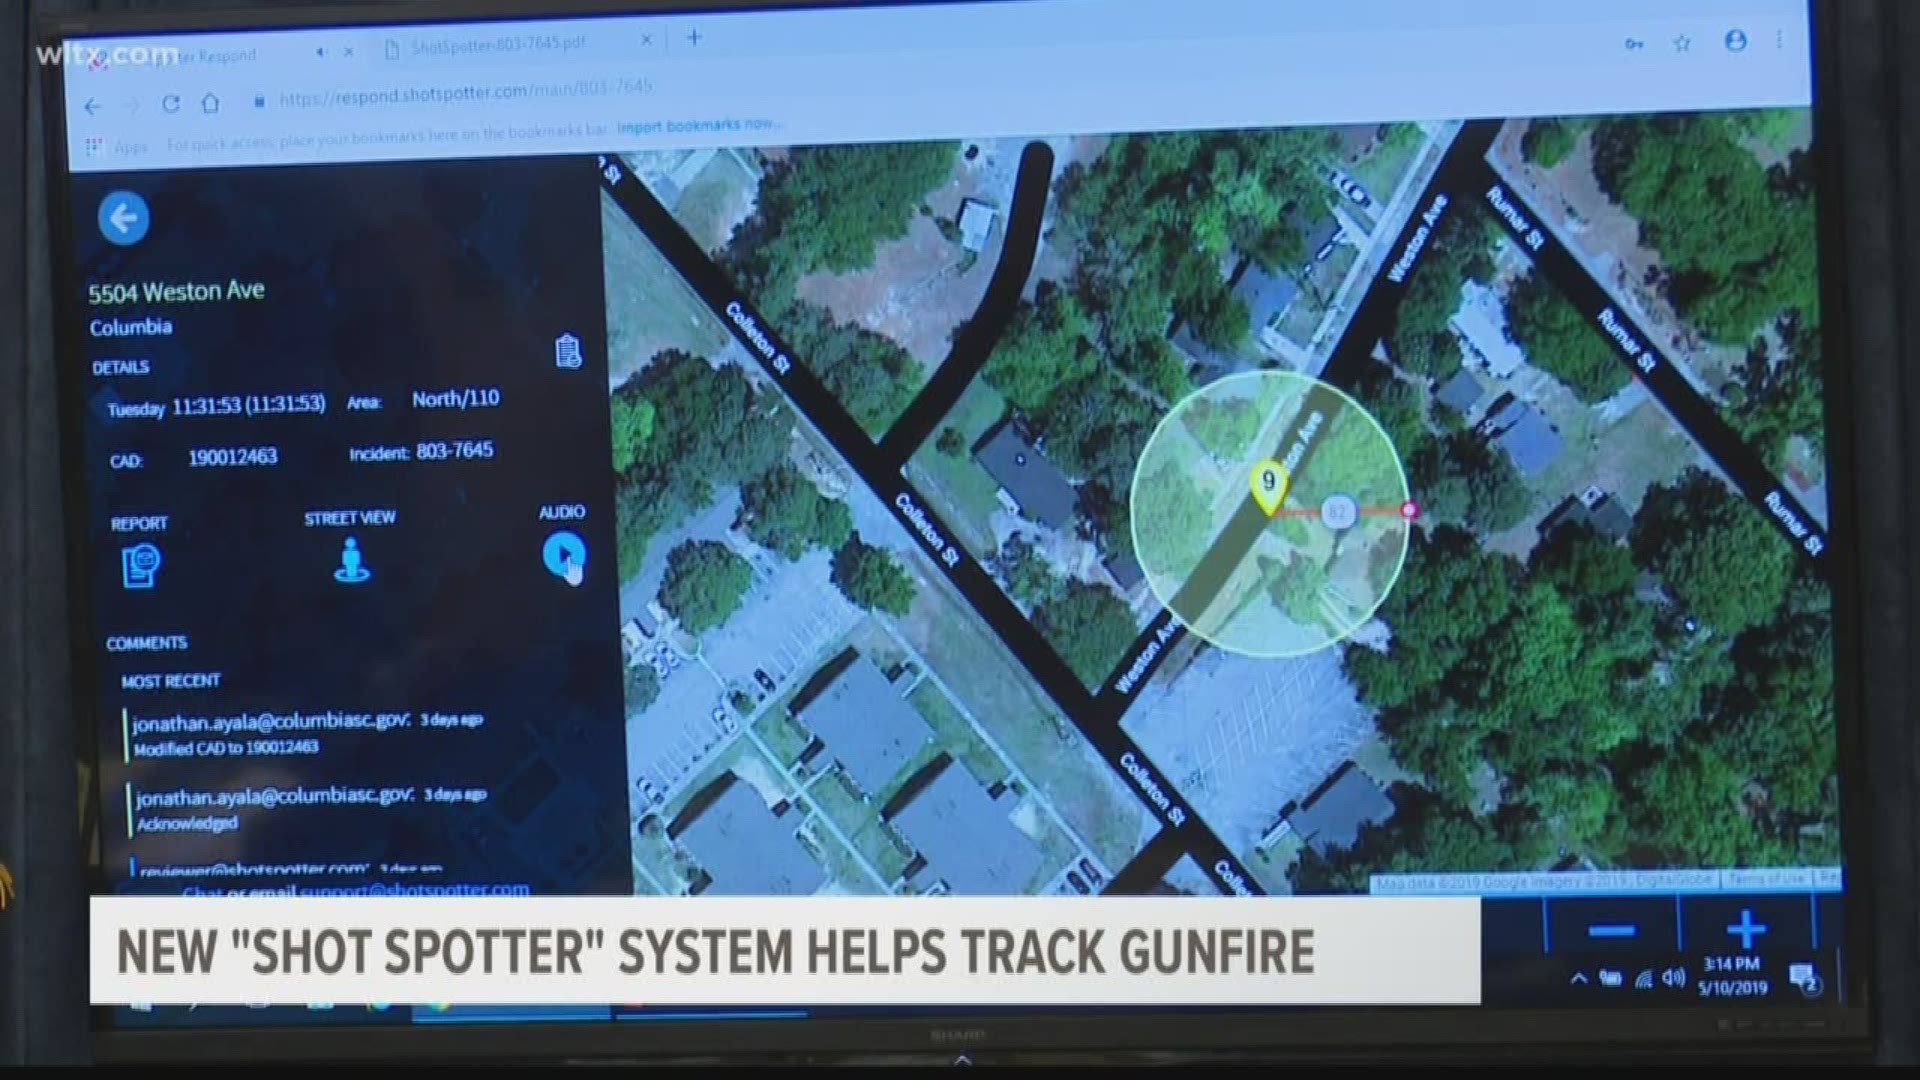 The Columbia Police Department announced they are using ShotSpotter, a gunshot detection technology that uses acoustics to detect, locate and alert law enforcement about gunfire in real time.